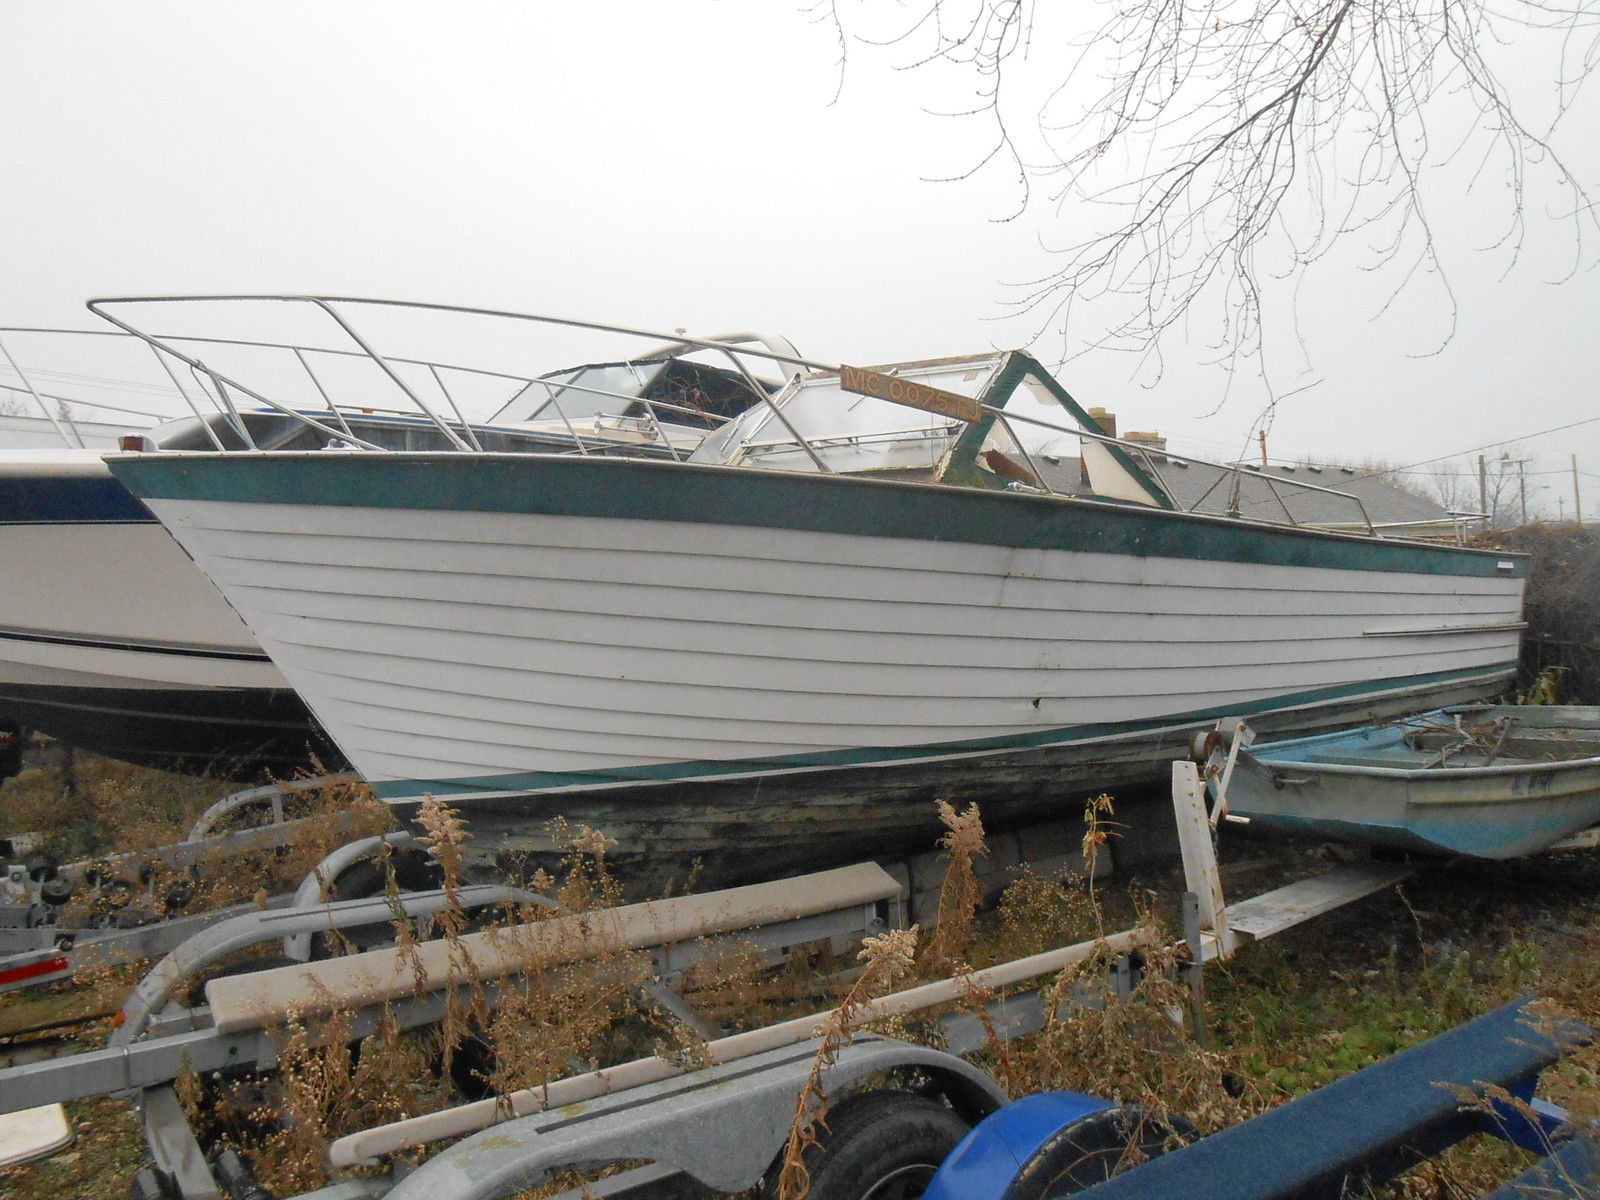 Chris Craft Sea Skiff 1967 for sale for $500 - Boats-from ...